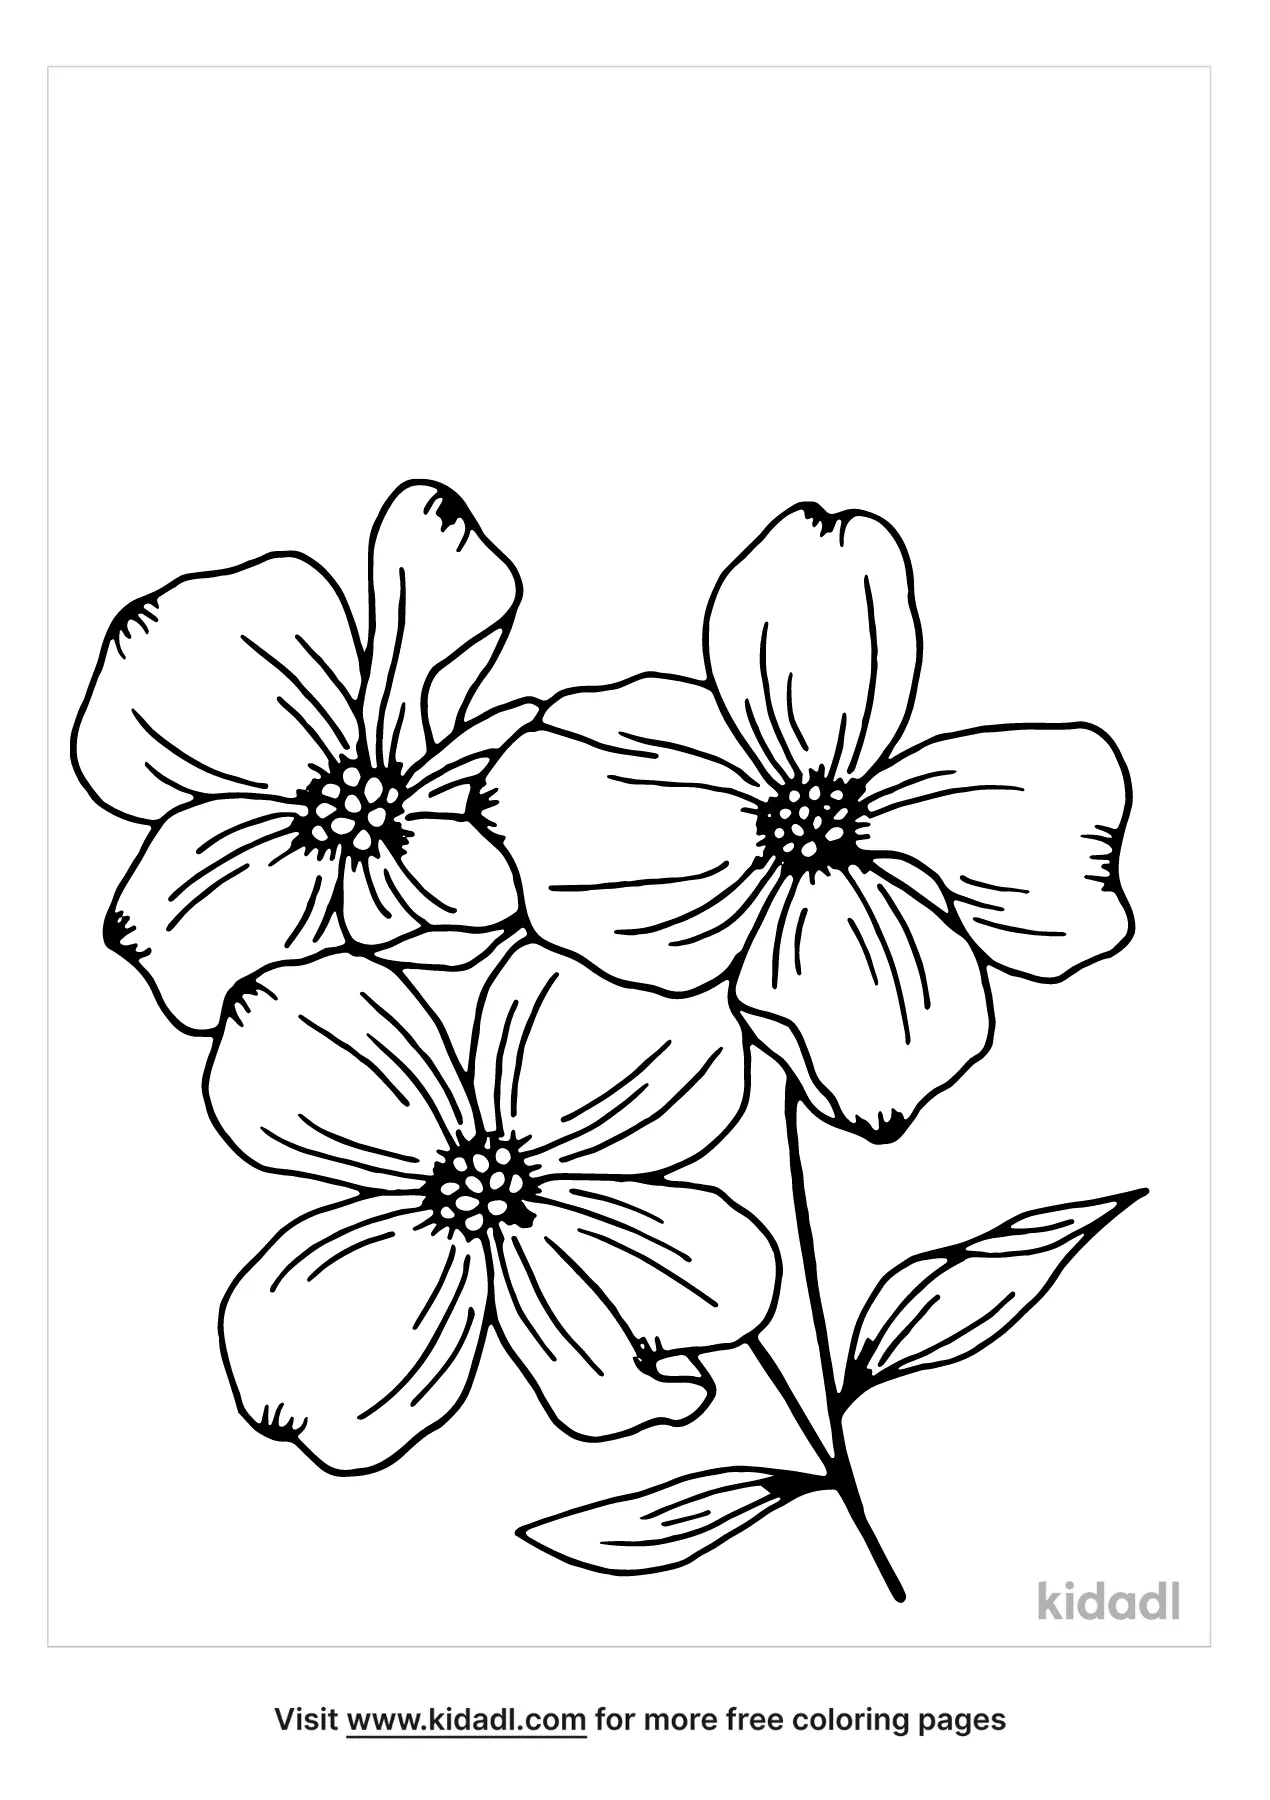 Free dogwood flower coloring page coloring page printables